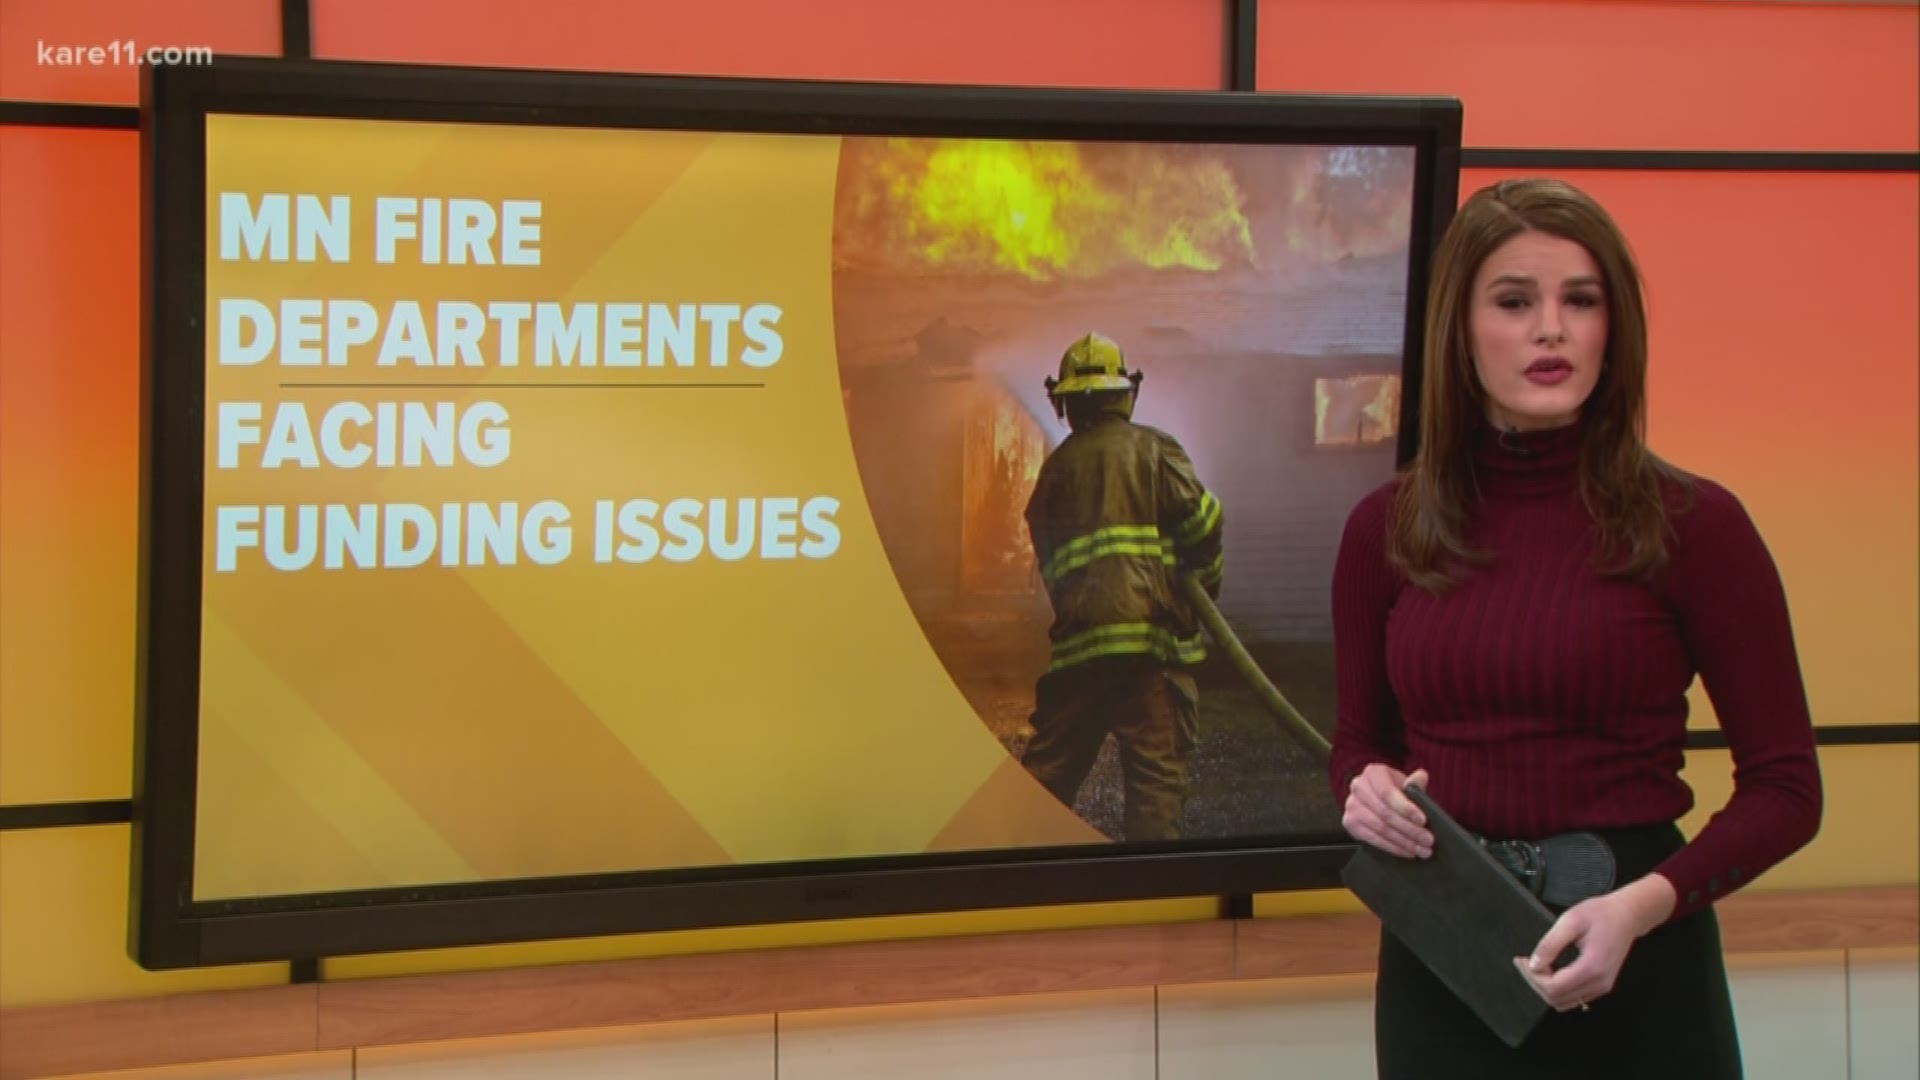 A new study from the Minnesota State Fire Chiefs Association says the state ranks 48th in the nation for fire department funding.